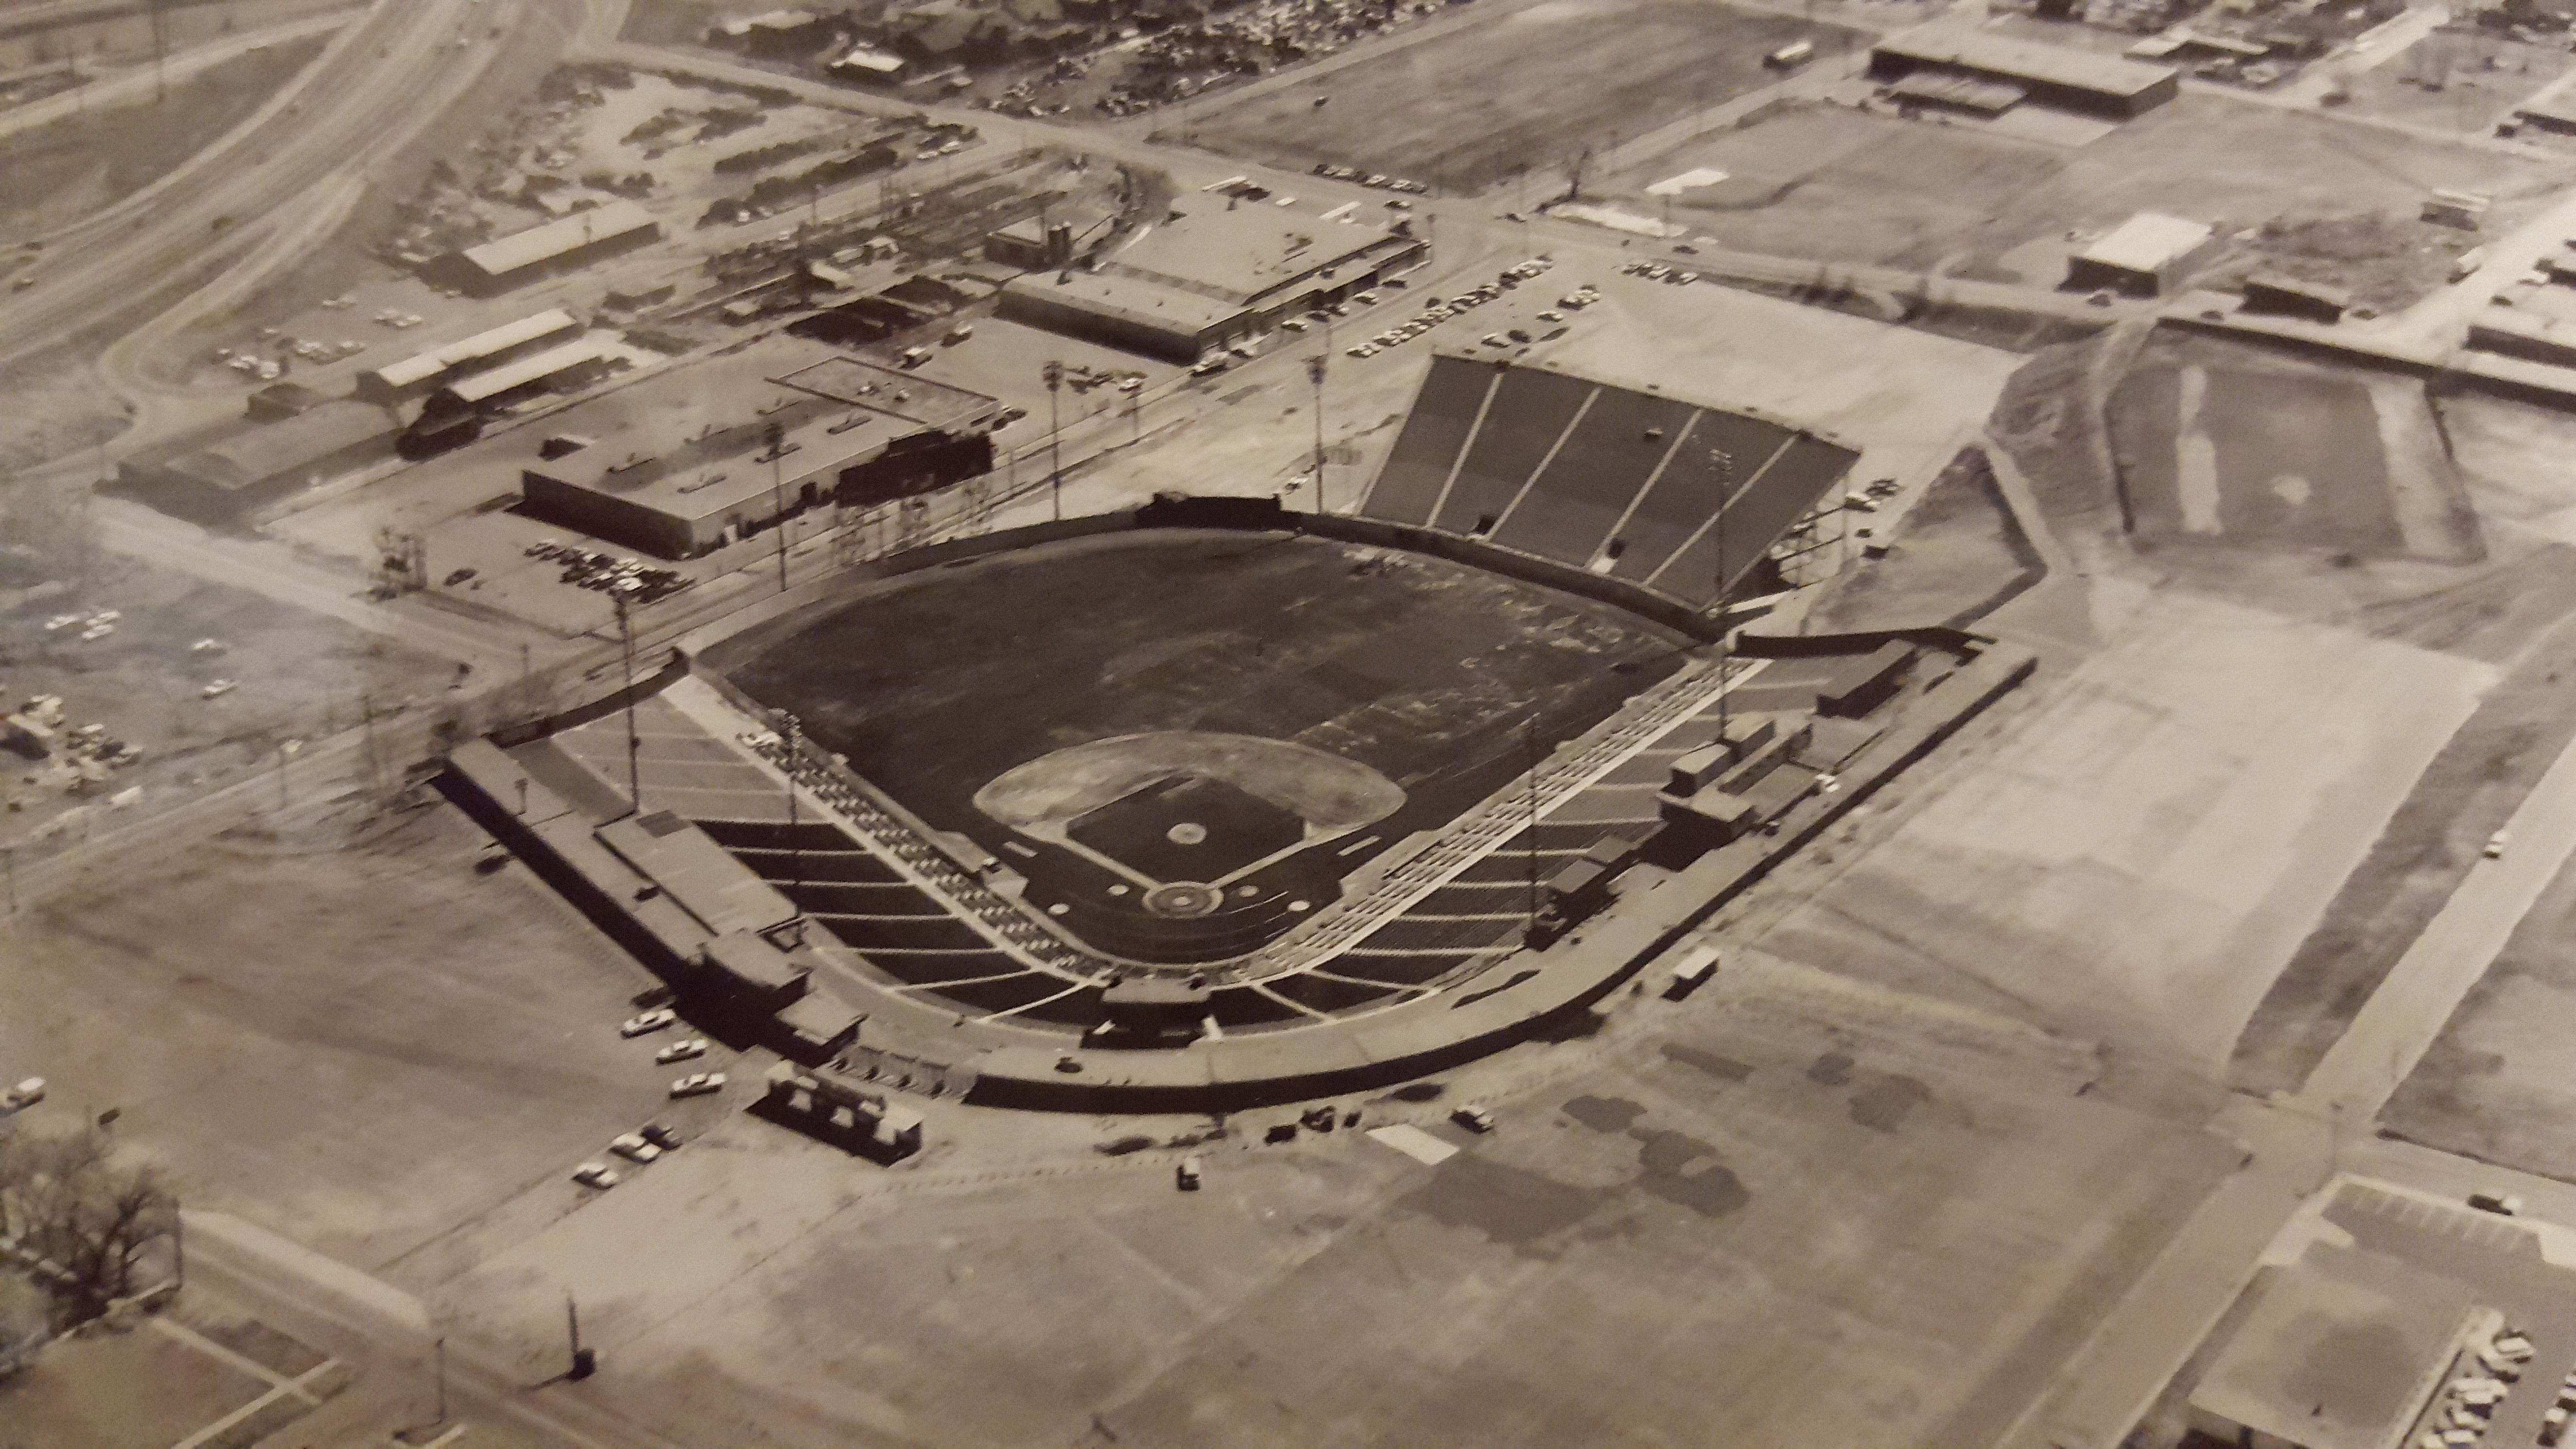 Mile High Stadium - history, photos and more of the Colorado